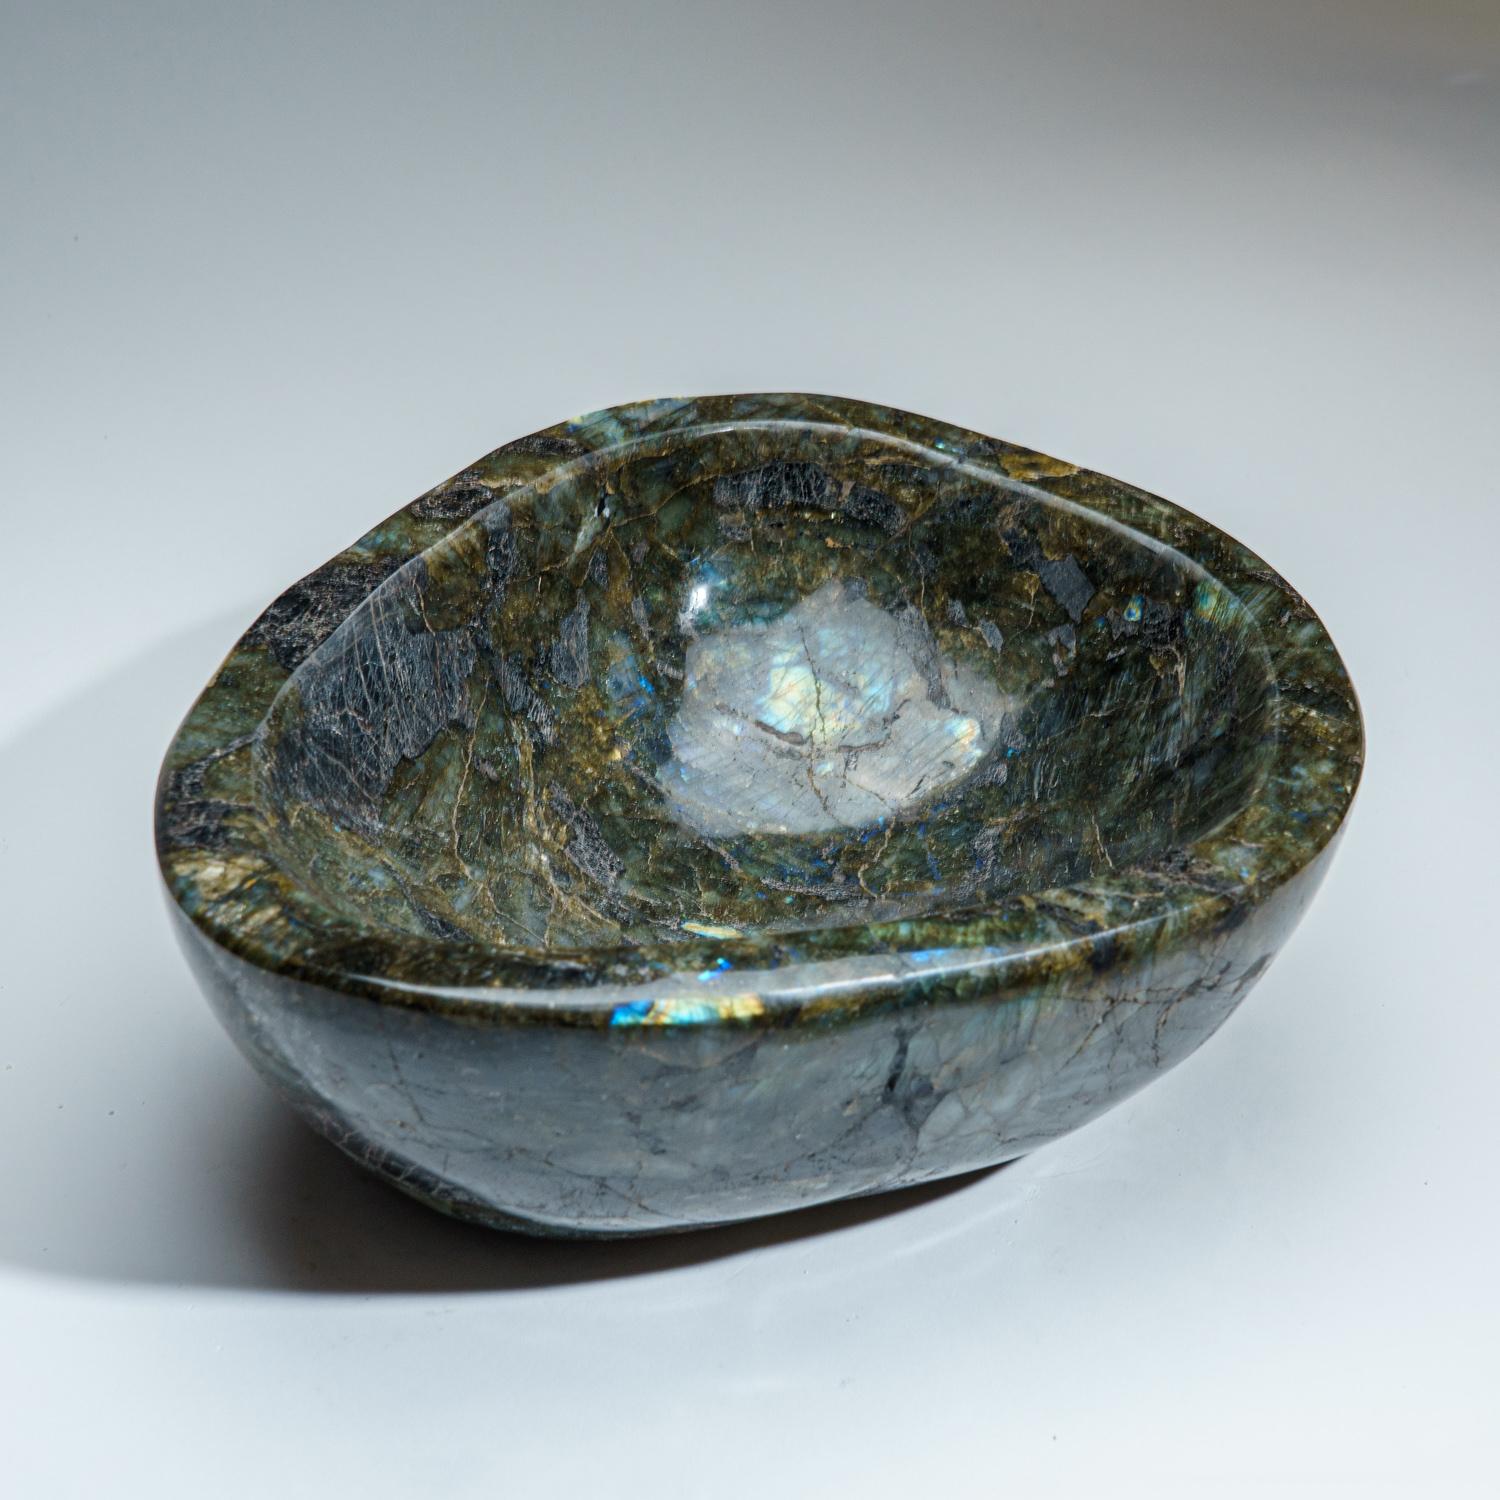 Contemporary Genuine Polished Labradorite Large Bowl from Madagascar (21 lbs) For Sale